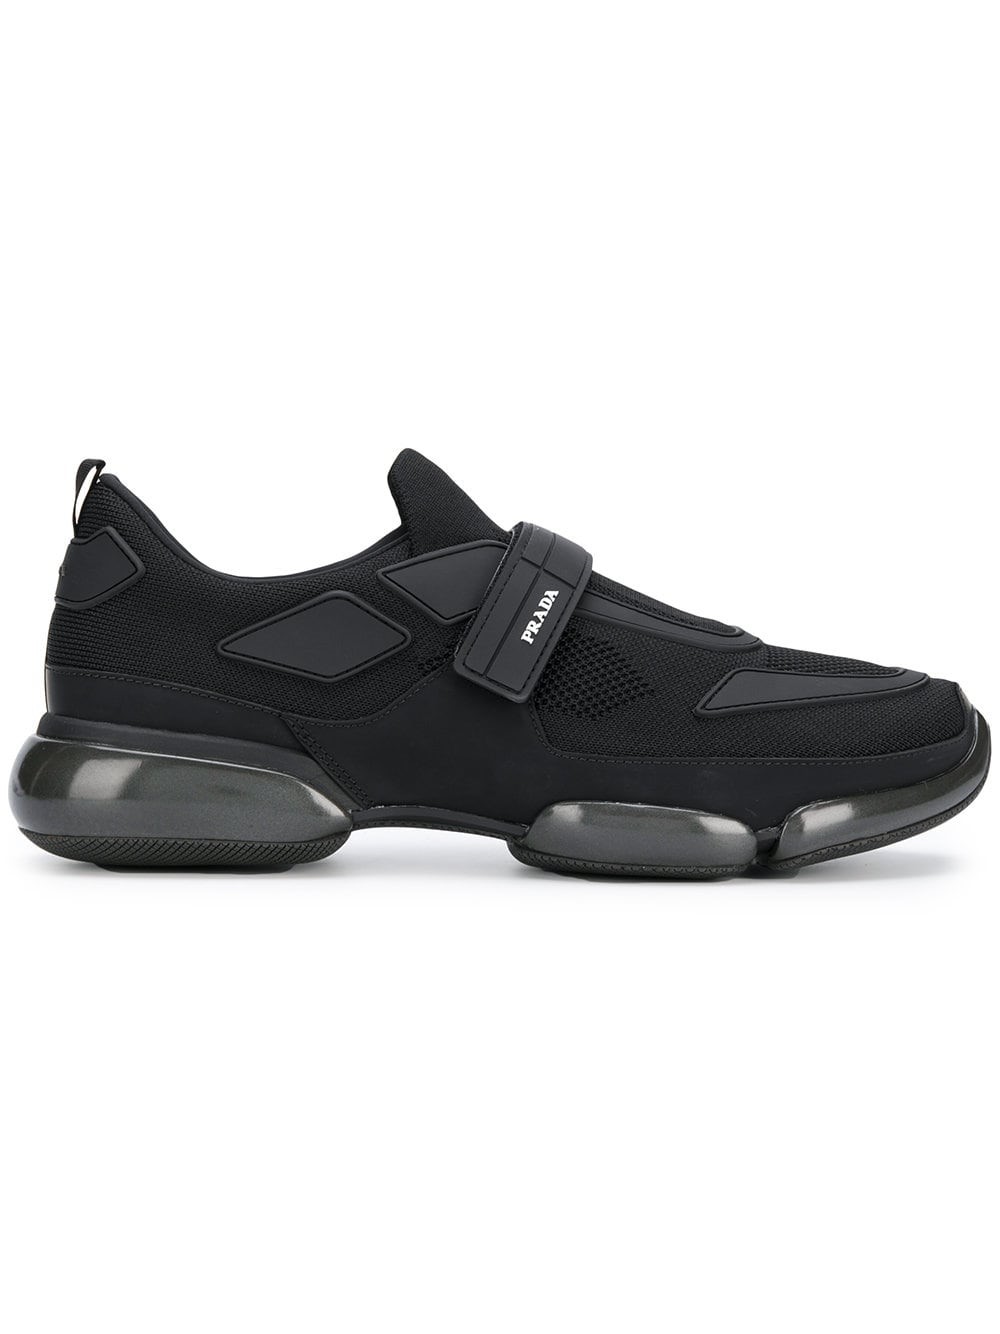 prada CLOUDBUST SNEAKERS available on montiboutique.com - 28314